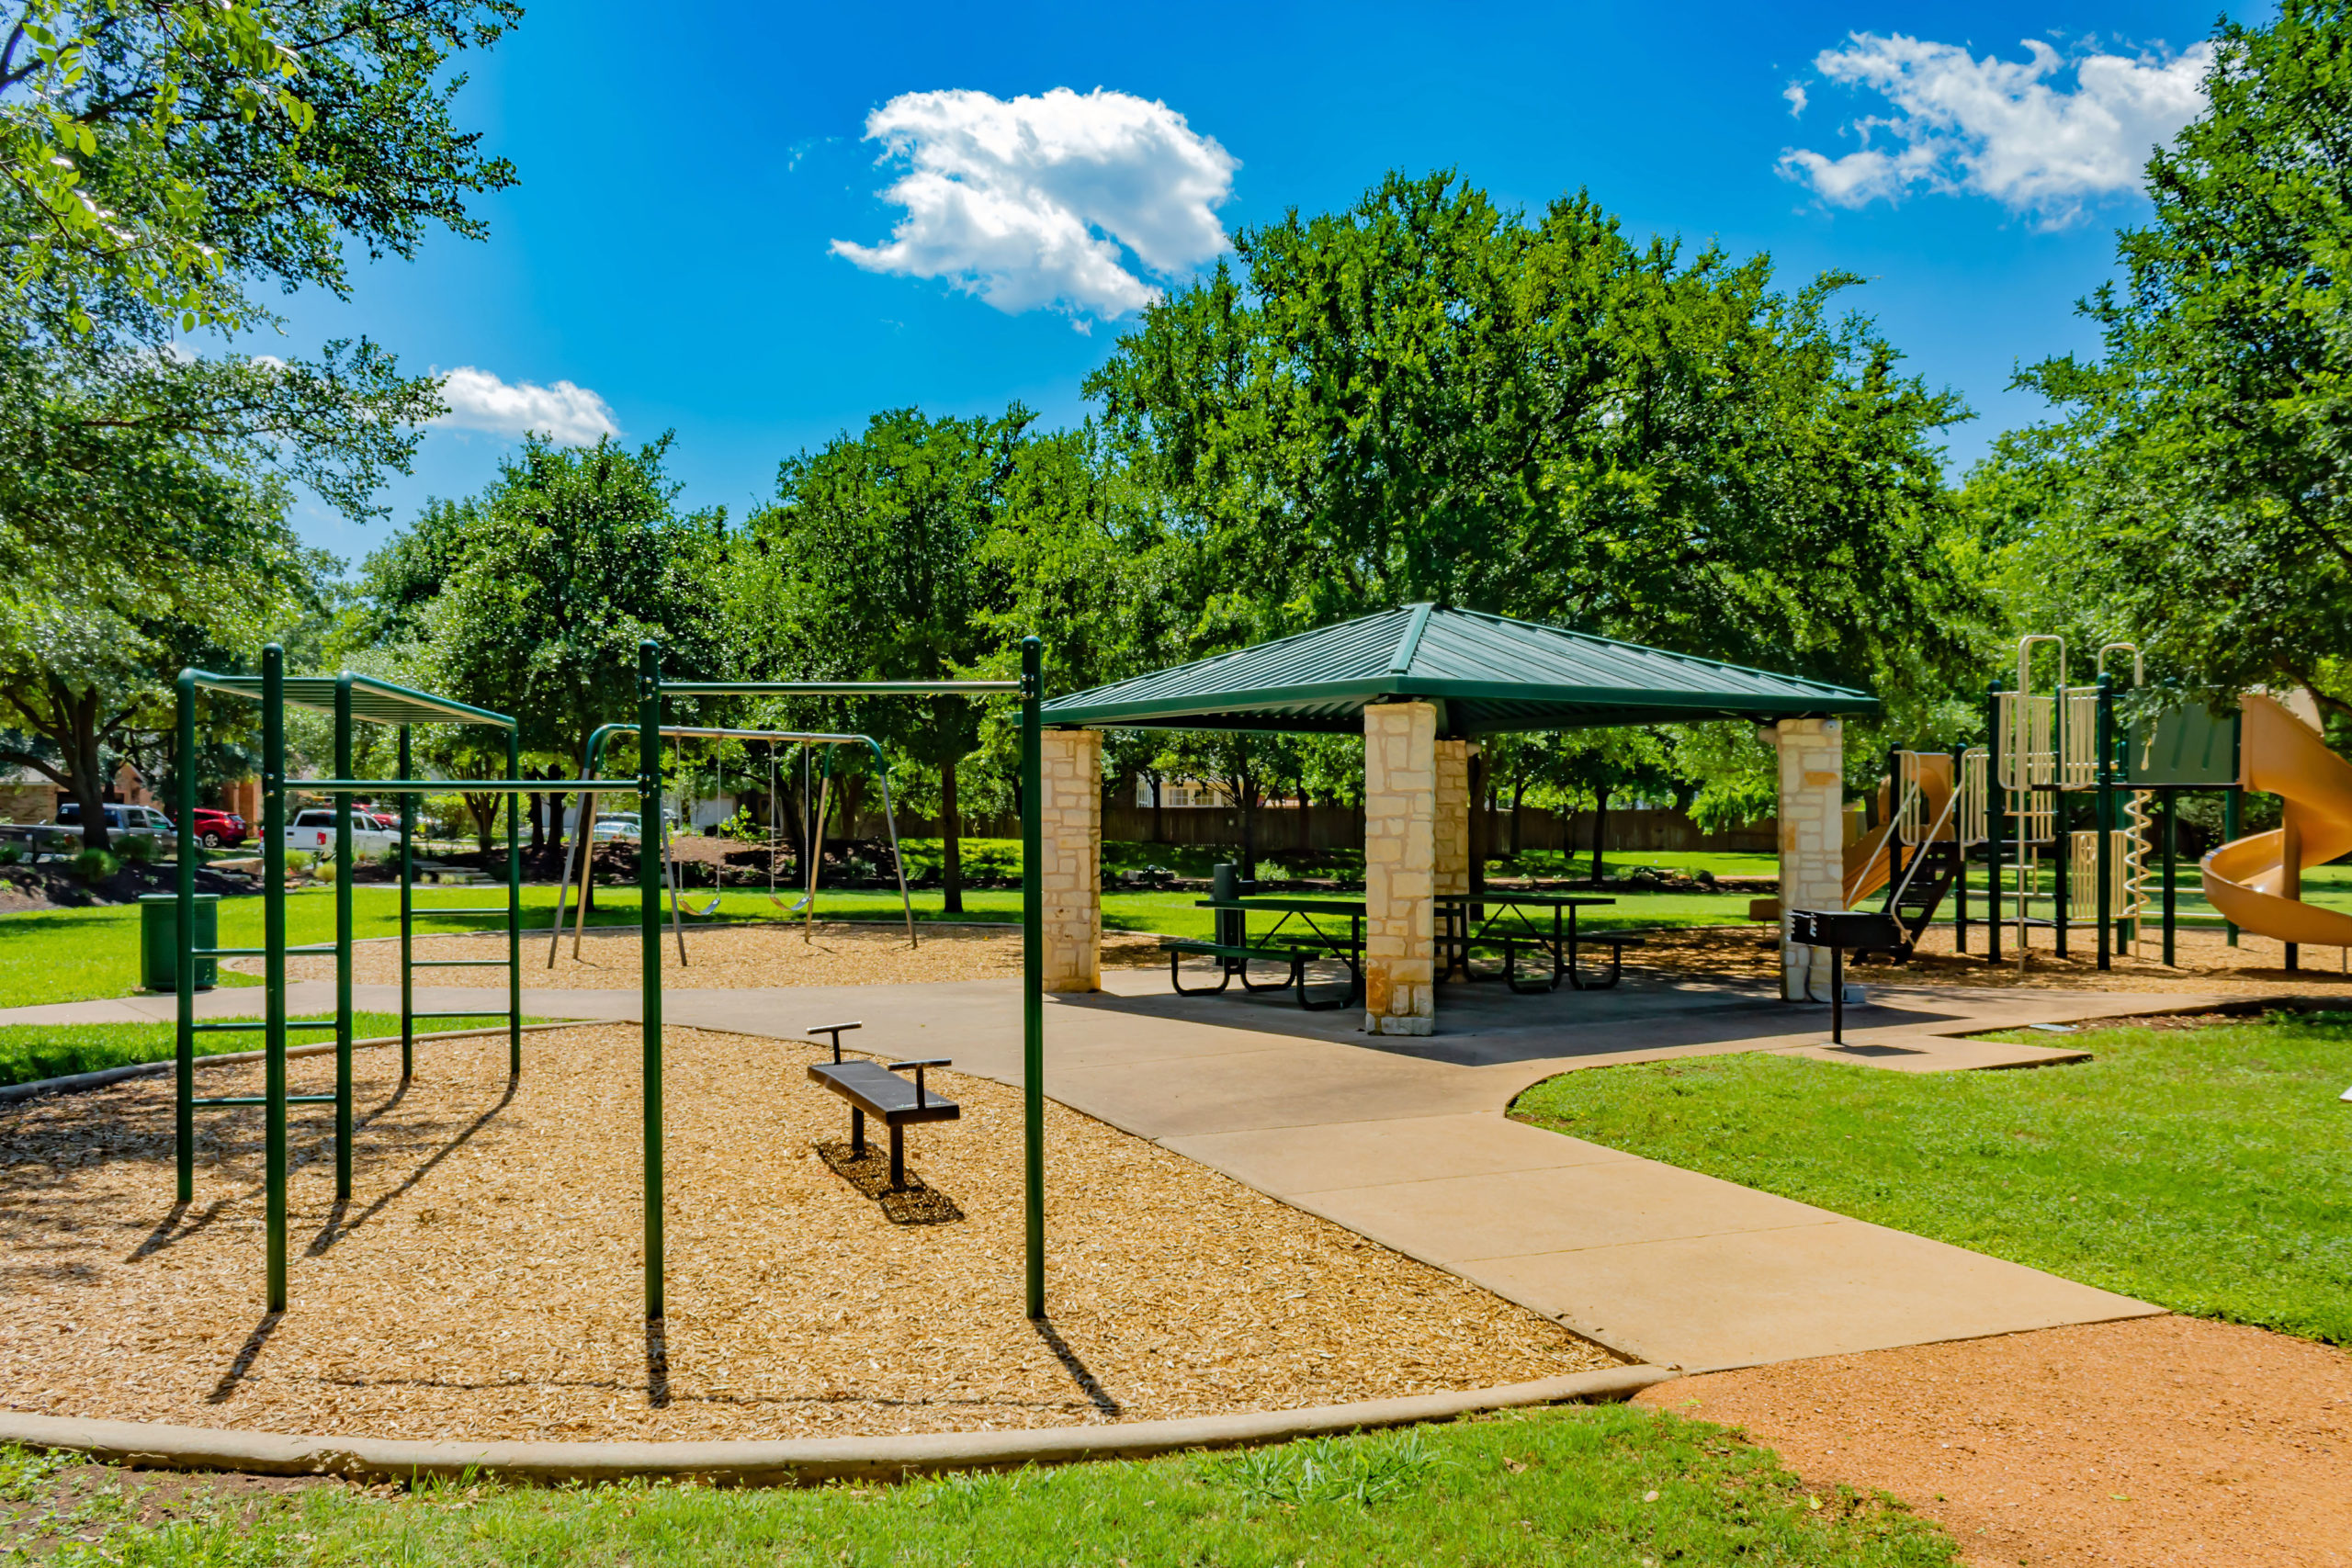 Picture of a playground and covered picnic tables.